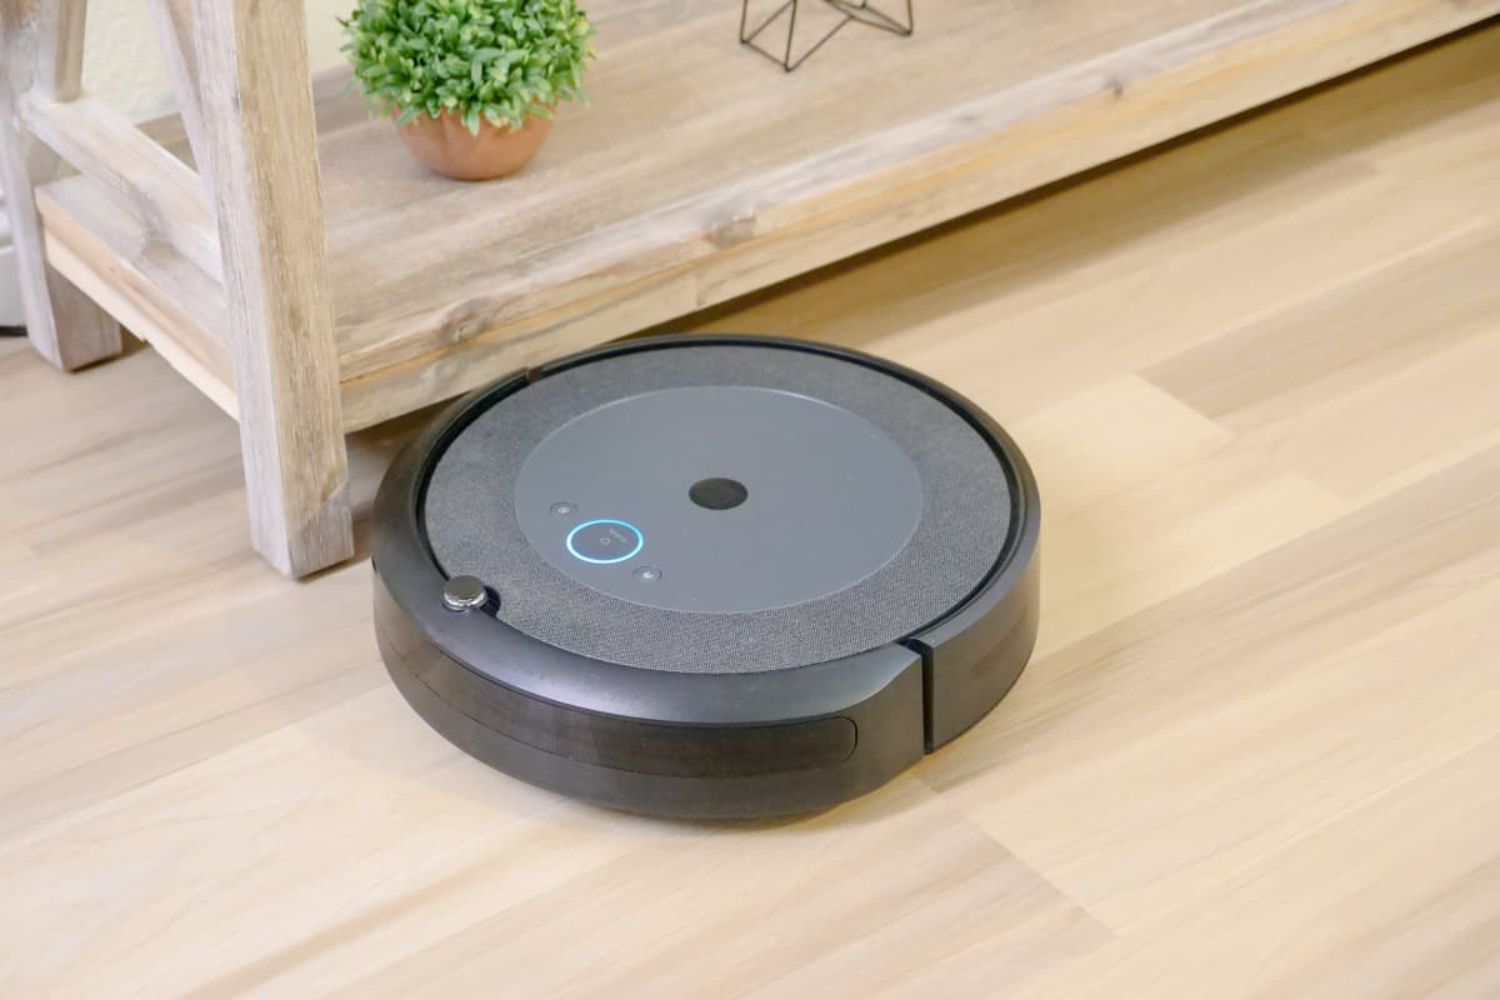 Why Won’t My Robot Vacuum Charge